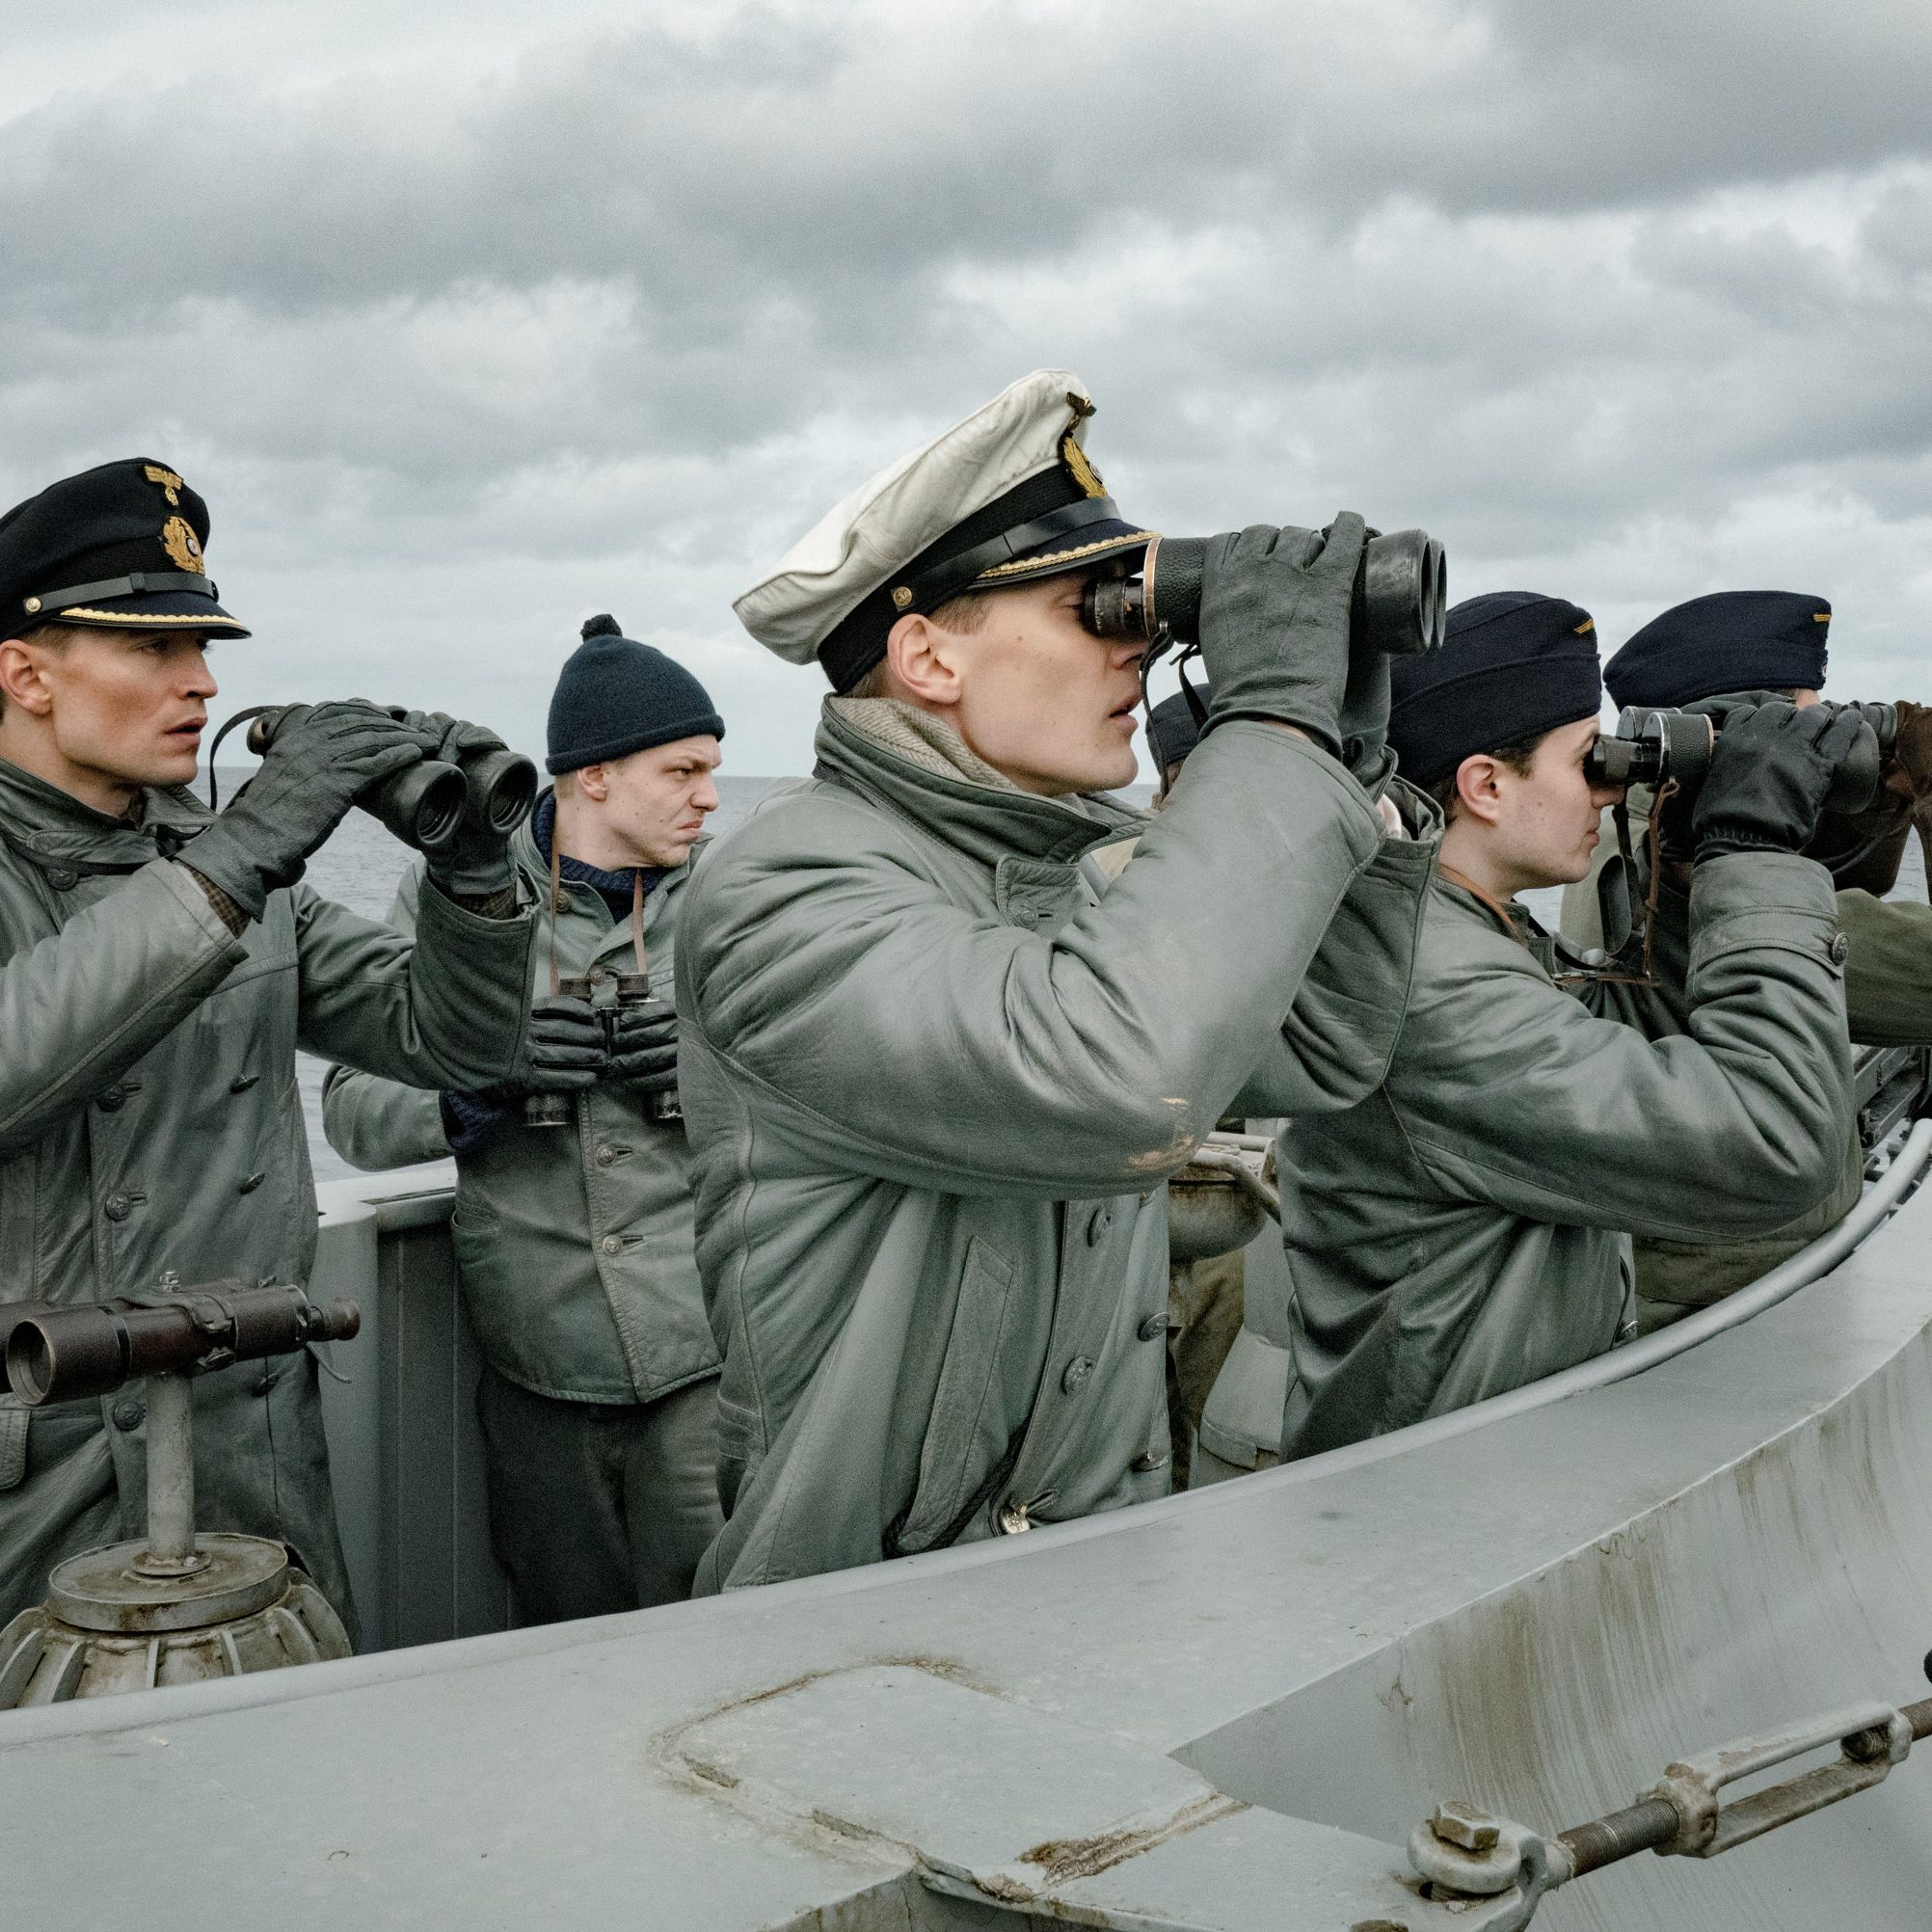 Das Boot season 2 release date: How many episodes are in Das Boot